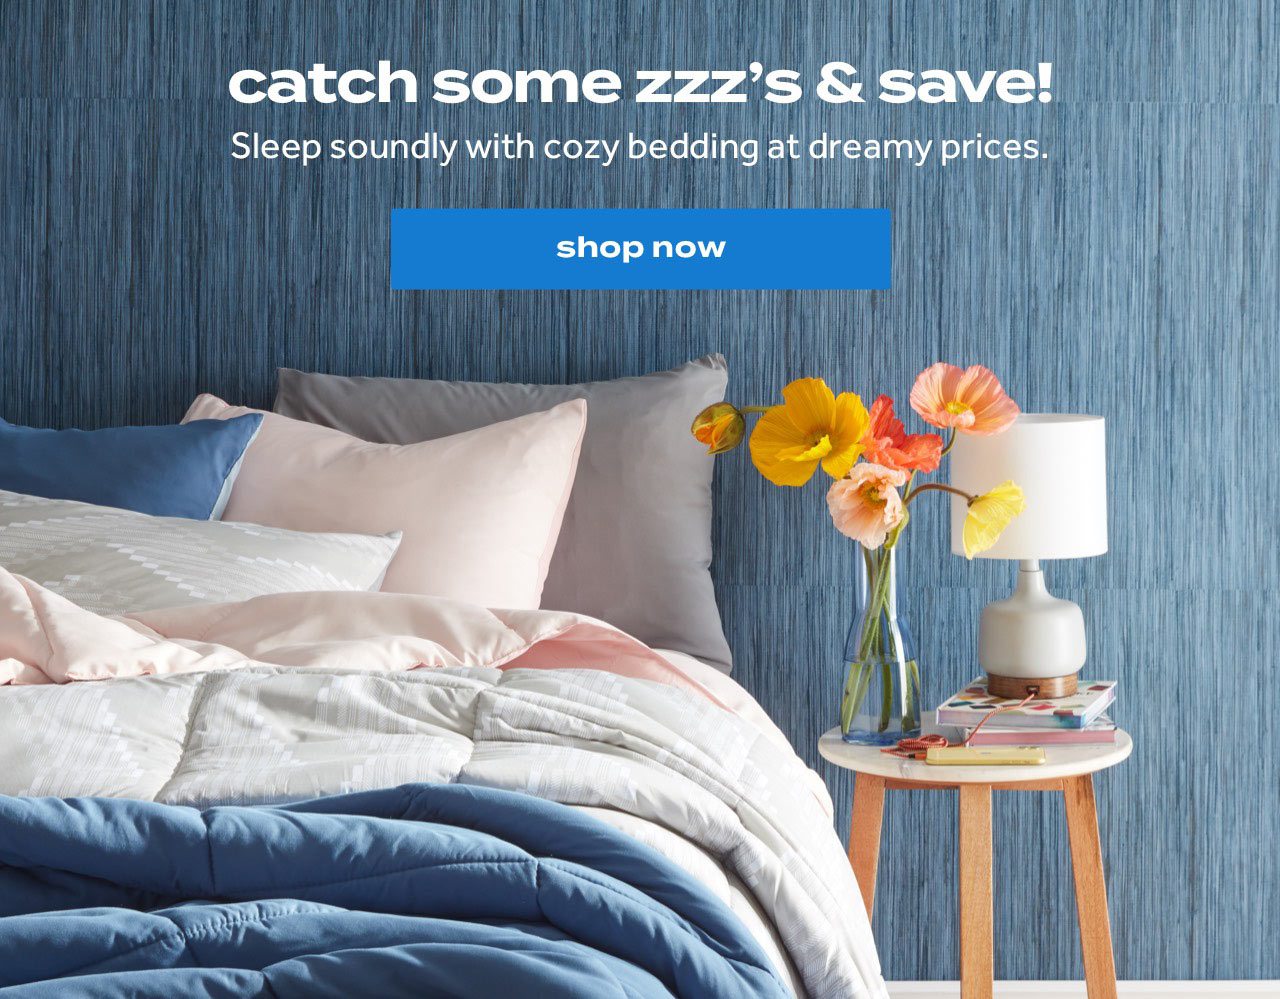 catch some zzz’s & save! | Sleep soundly with cozy bedding at dreamy prices. | shop now